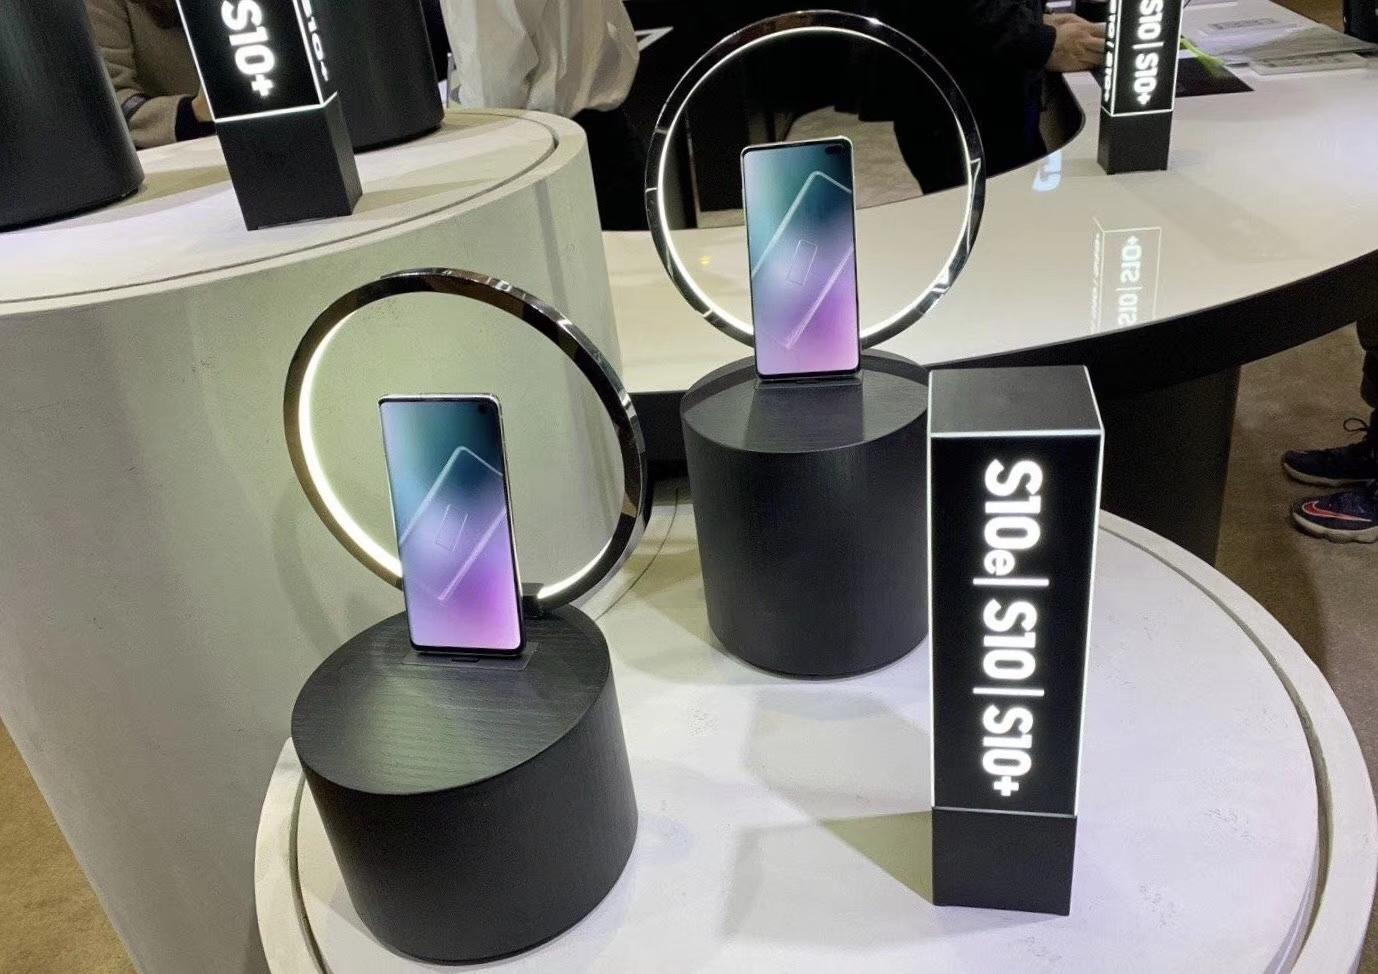 samsung new phone s10 launch event